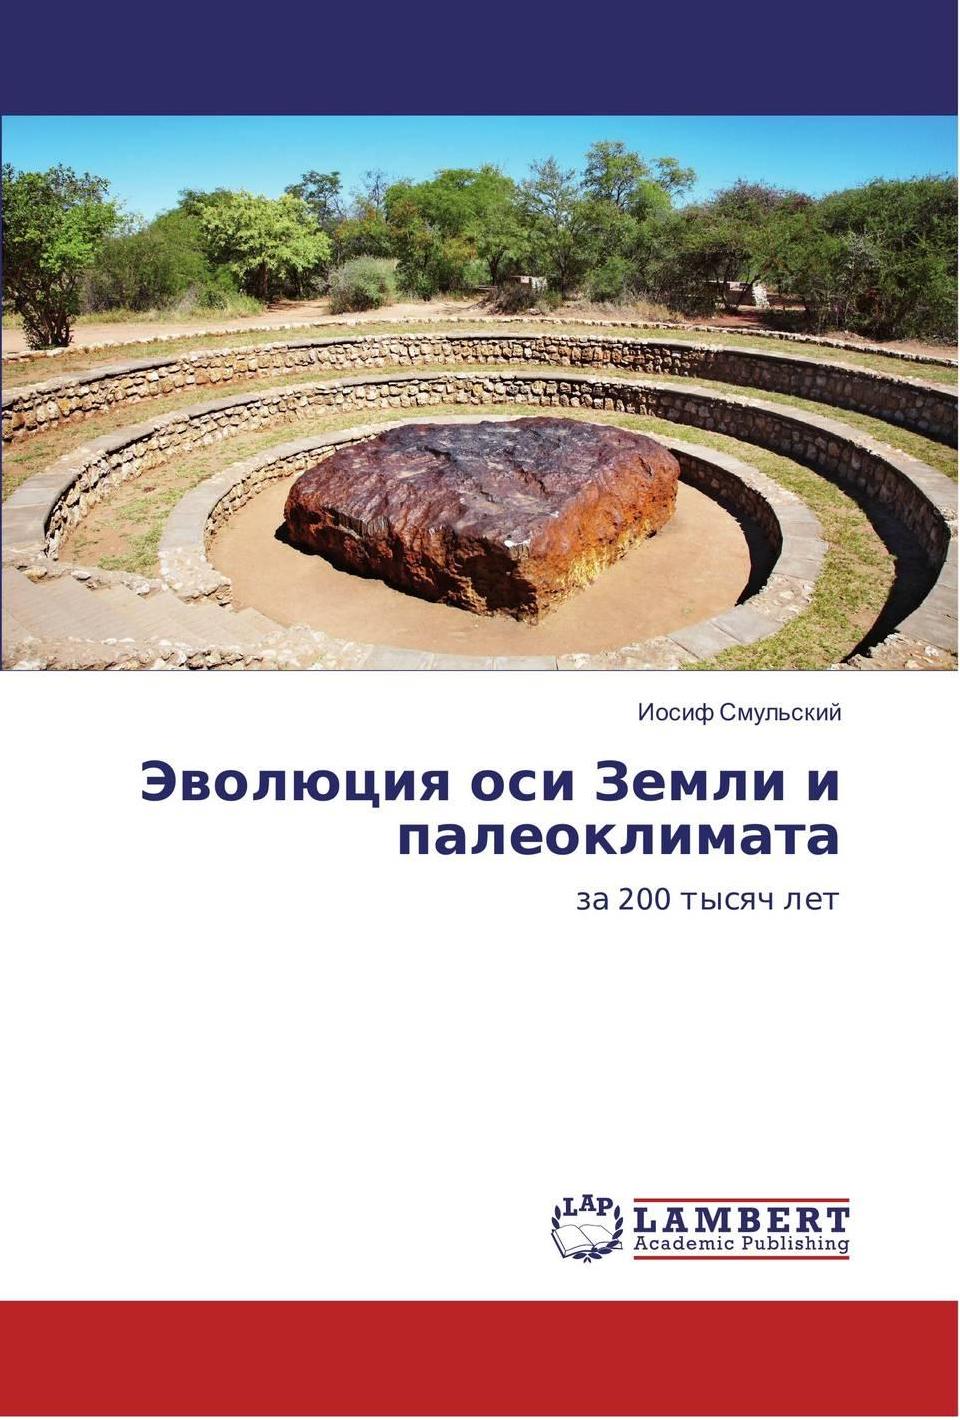 Smulsky J.J. Evolution of the Earth's axis and paleoclimate for 200 thousand years. Saarbrucken, Germany: LAP Lambert Academic Publishing, 2016. 228 p. ISBN 978-3-659-95633-1. (In Russian).